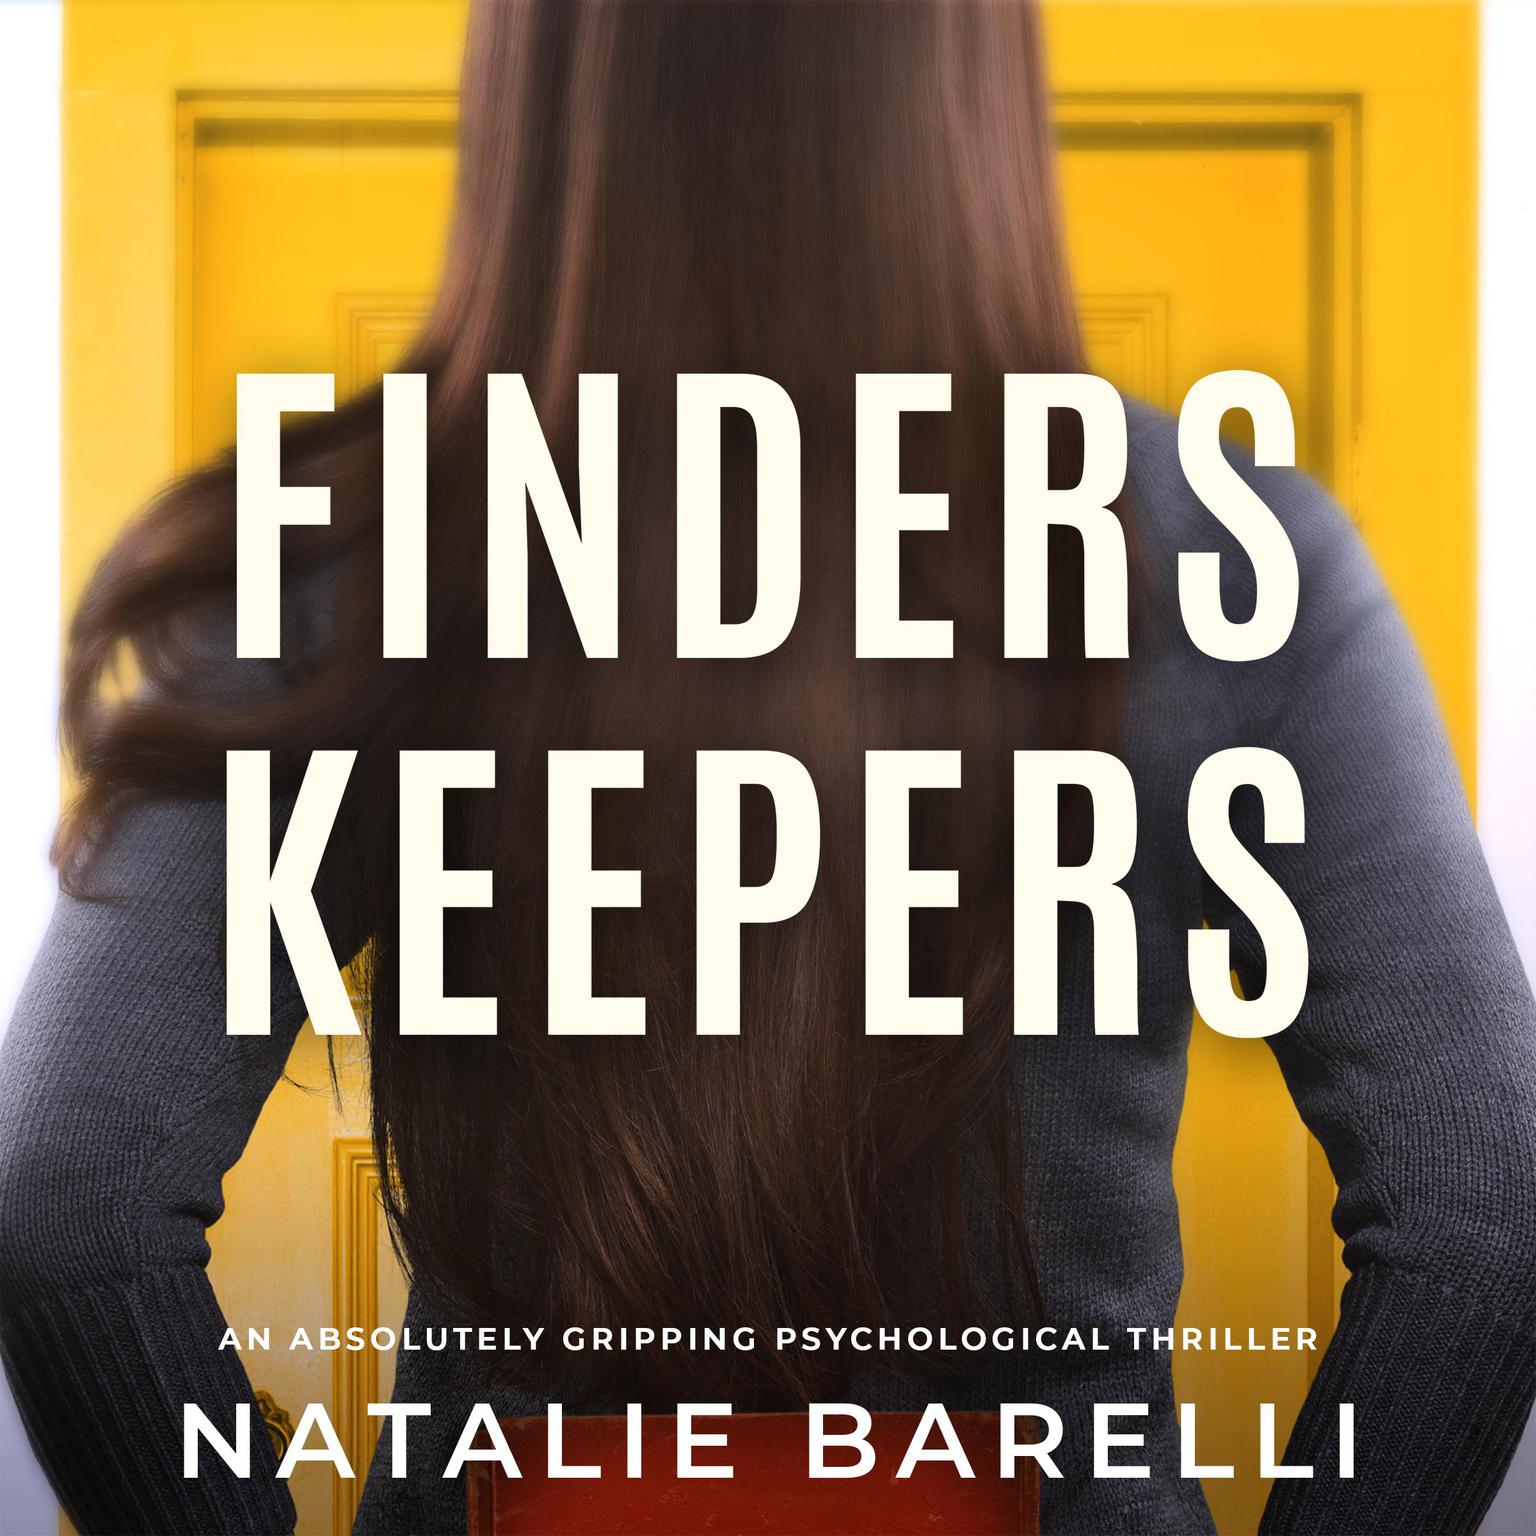 Finders Keepers Audiobook, by Natalie Barelli